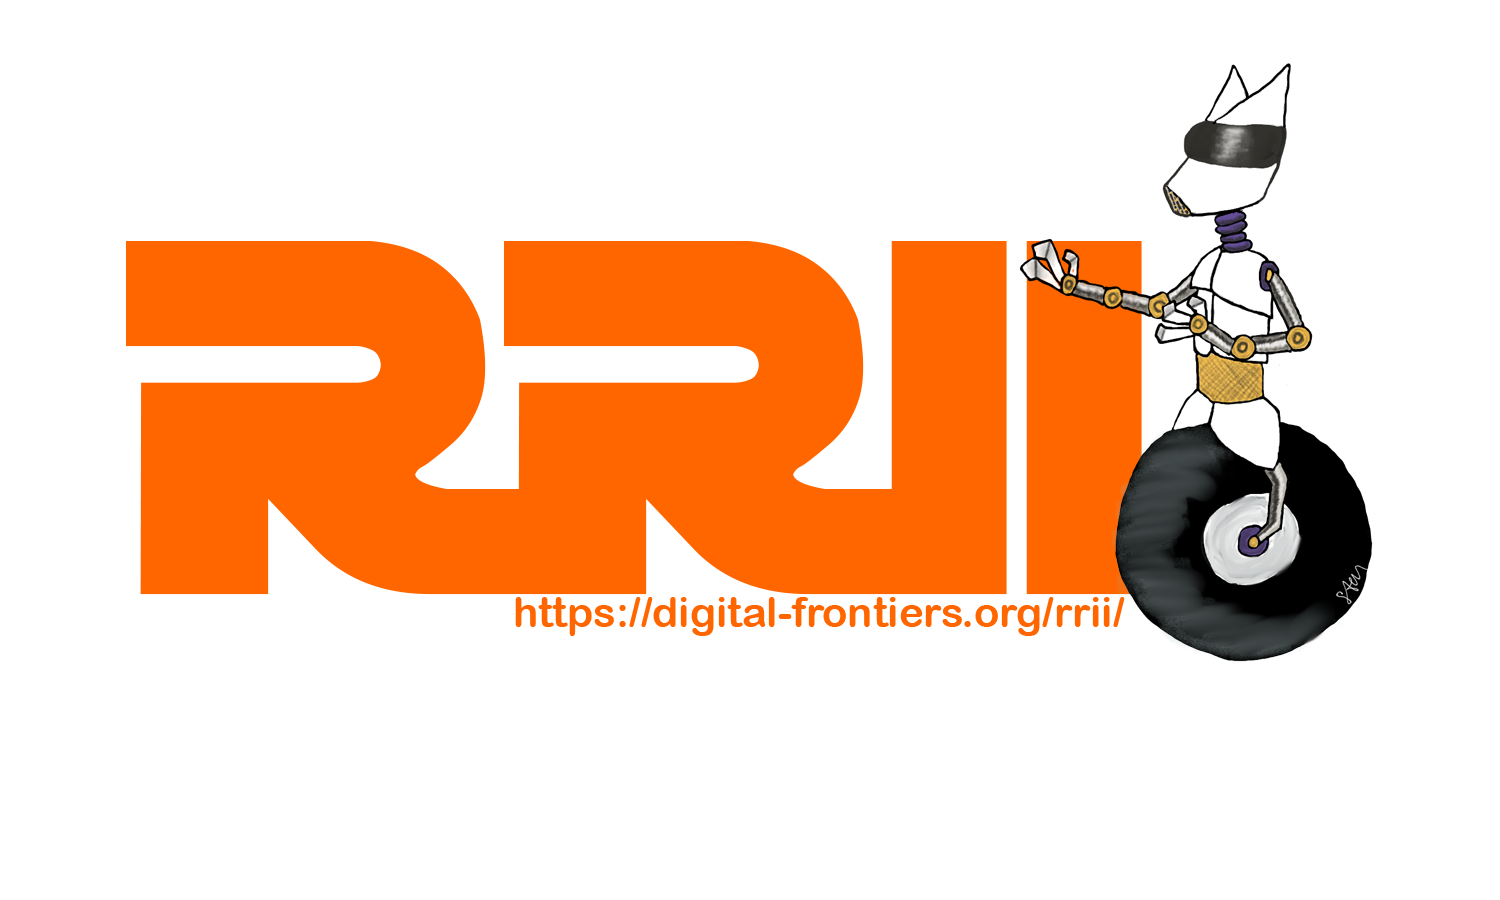 Realizing Resistance Two logo features the stylized letters "RRII" and an image of our nonbinary droid mascot, RiRi. They have a cat-like head, a humanoid torso and arms, and one large wheel for mobility.